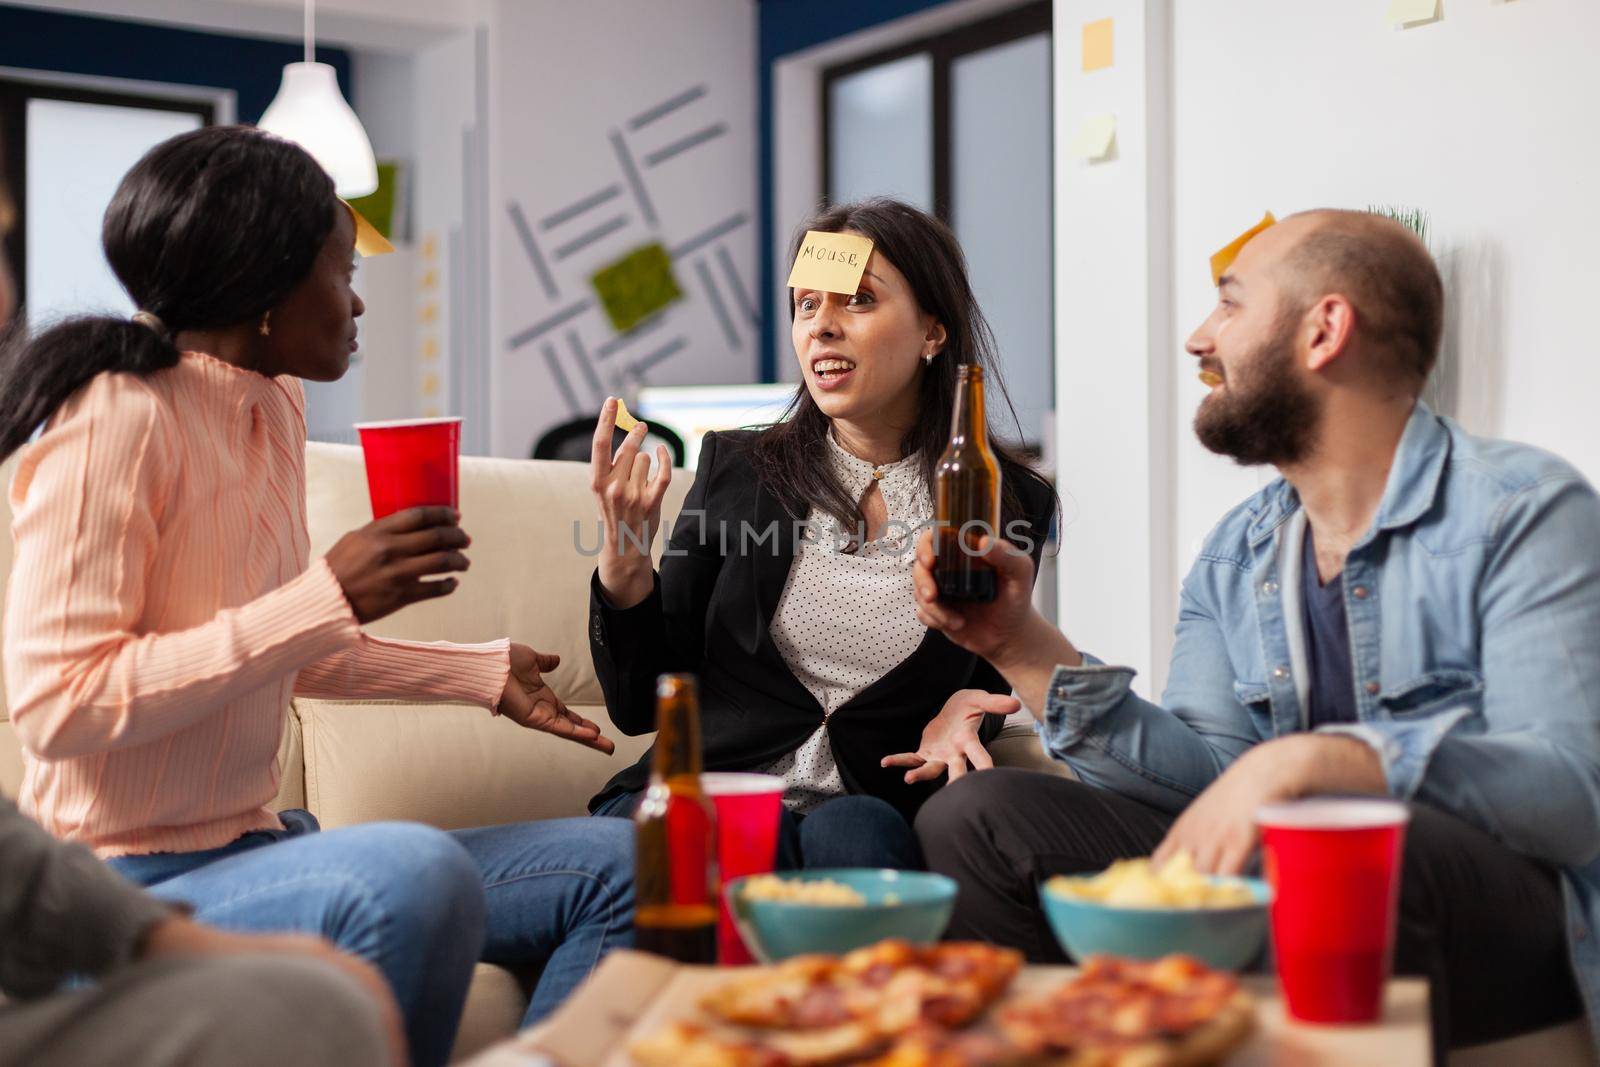 Cheerful group of colleagues enjoying a game of charades after work at office. Multi ethnic people play imitation concept for fun activity entertainment while eating pizza and drinking beer